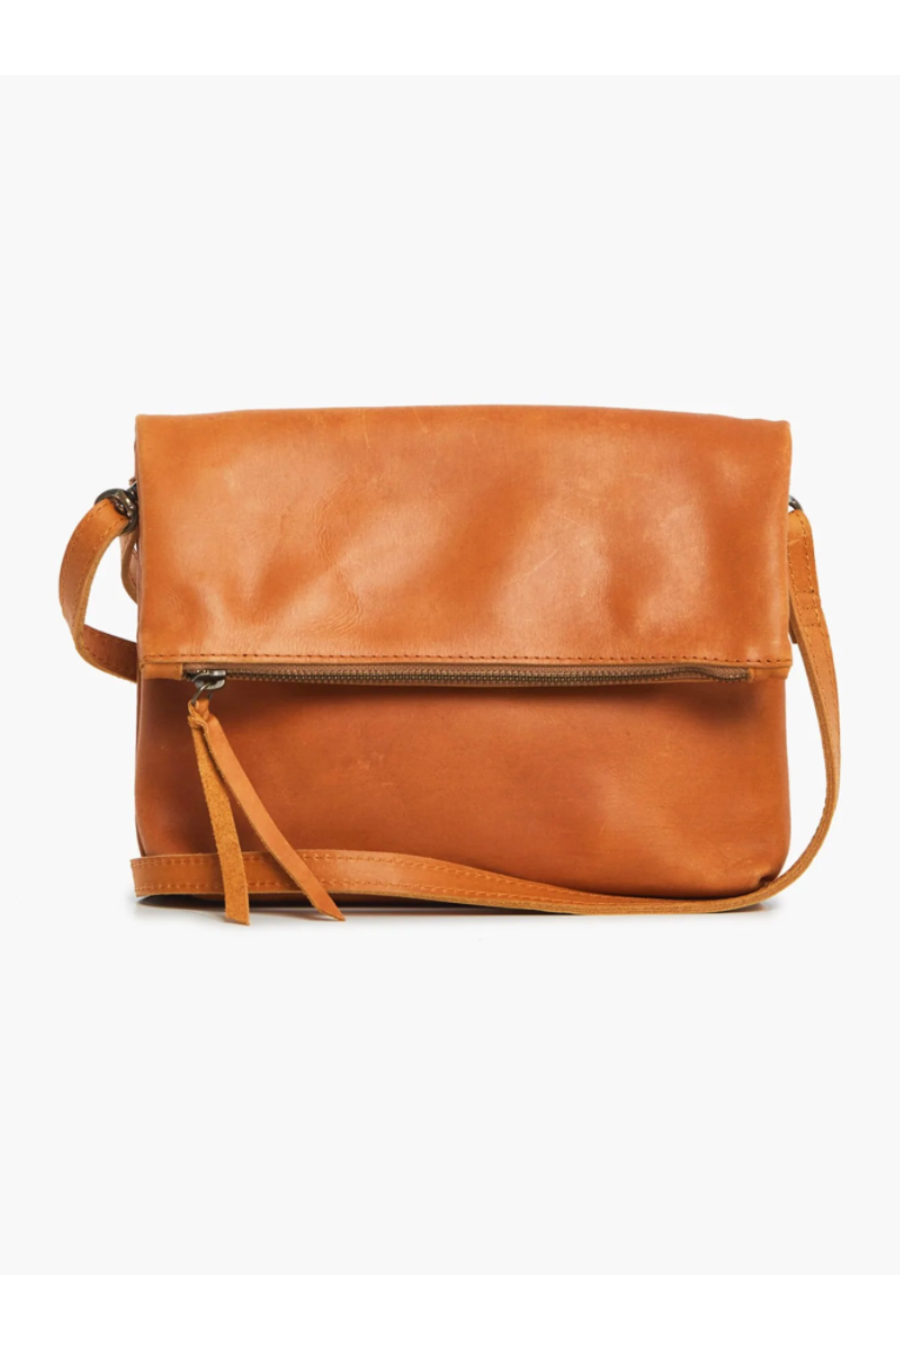 Emnet Foldover Crossbody-Accessories-Whiskey-[option4]-[option5]-[option6]-Shop-Womens-Boutique-Store